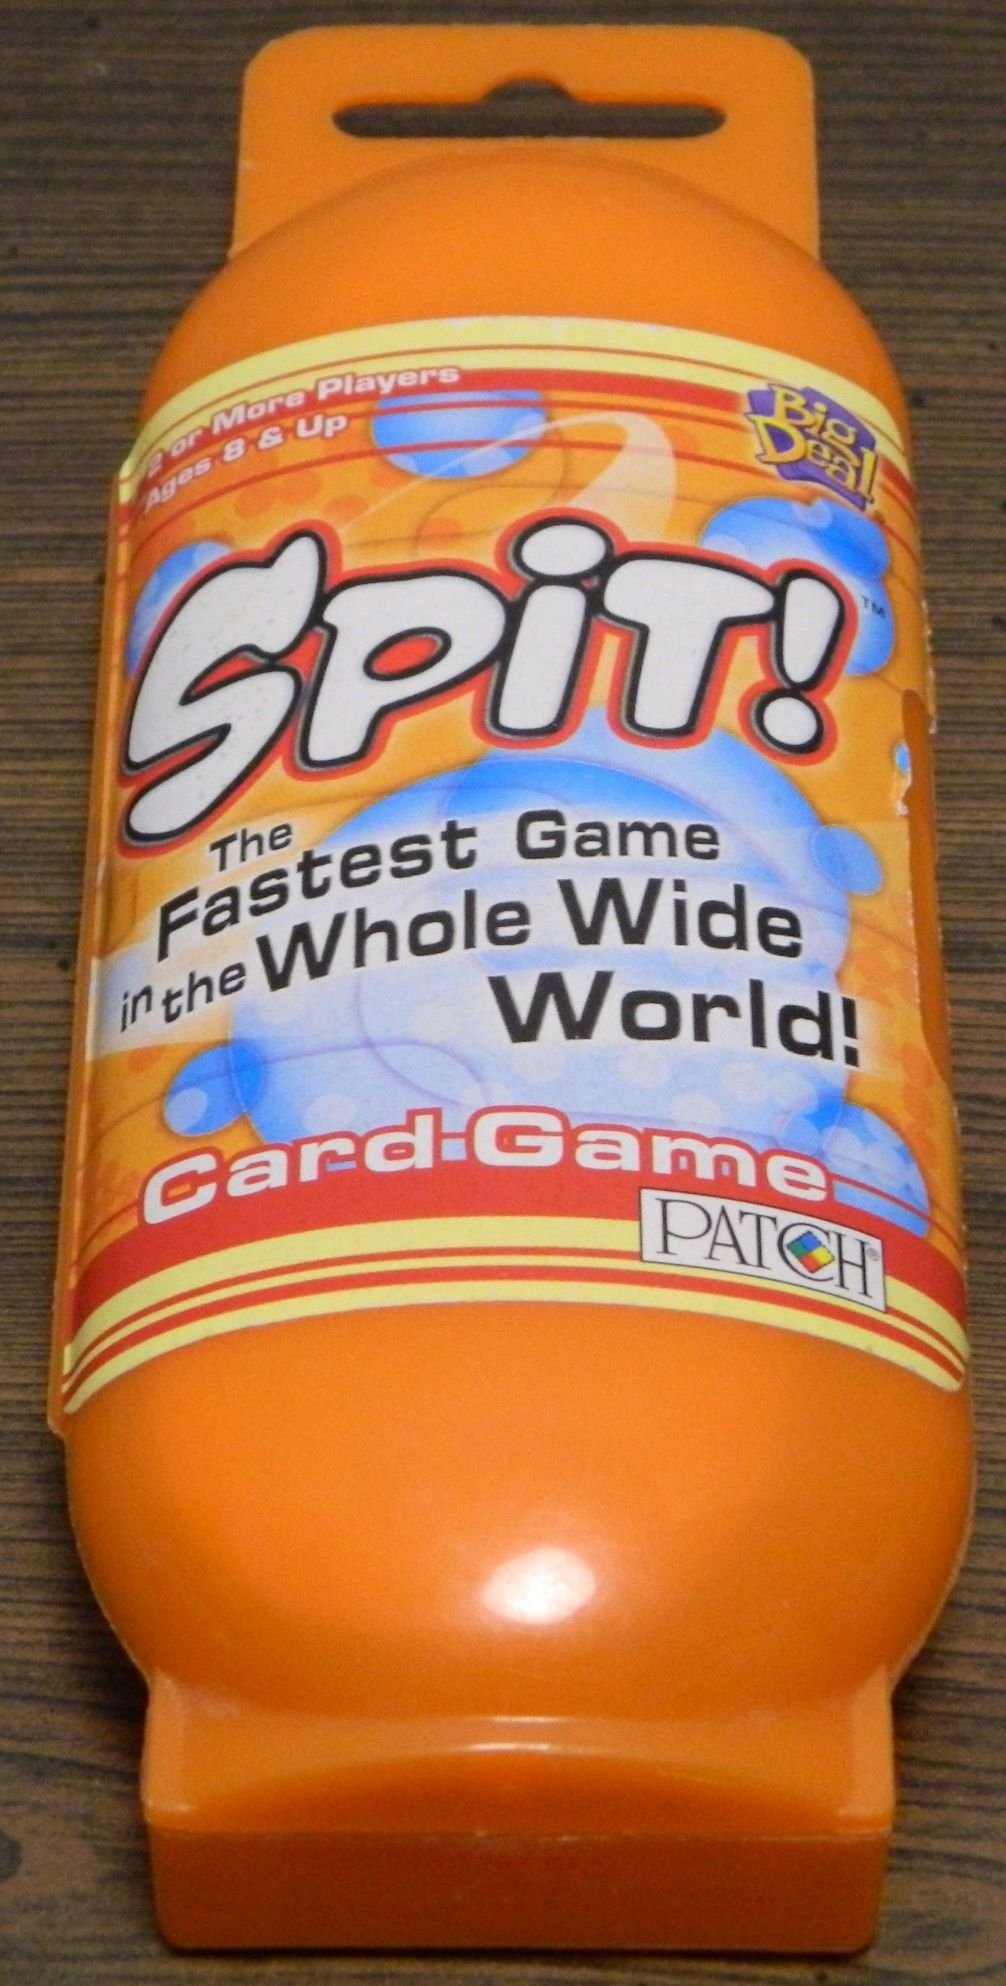 Spit! Card Game Review and Rules